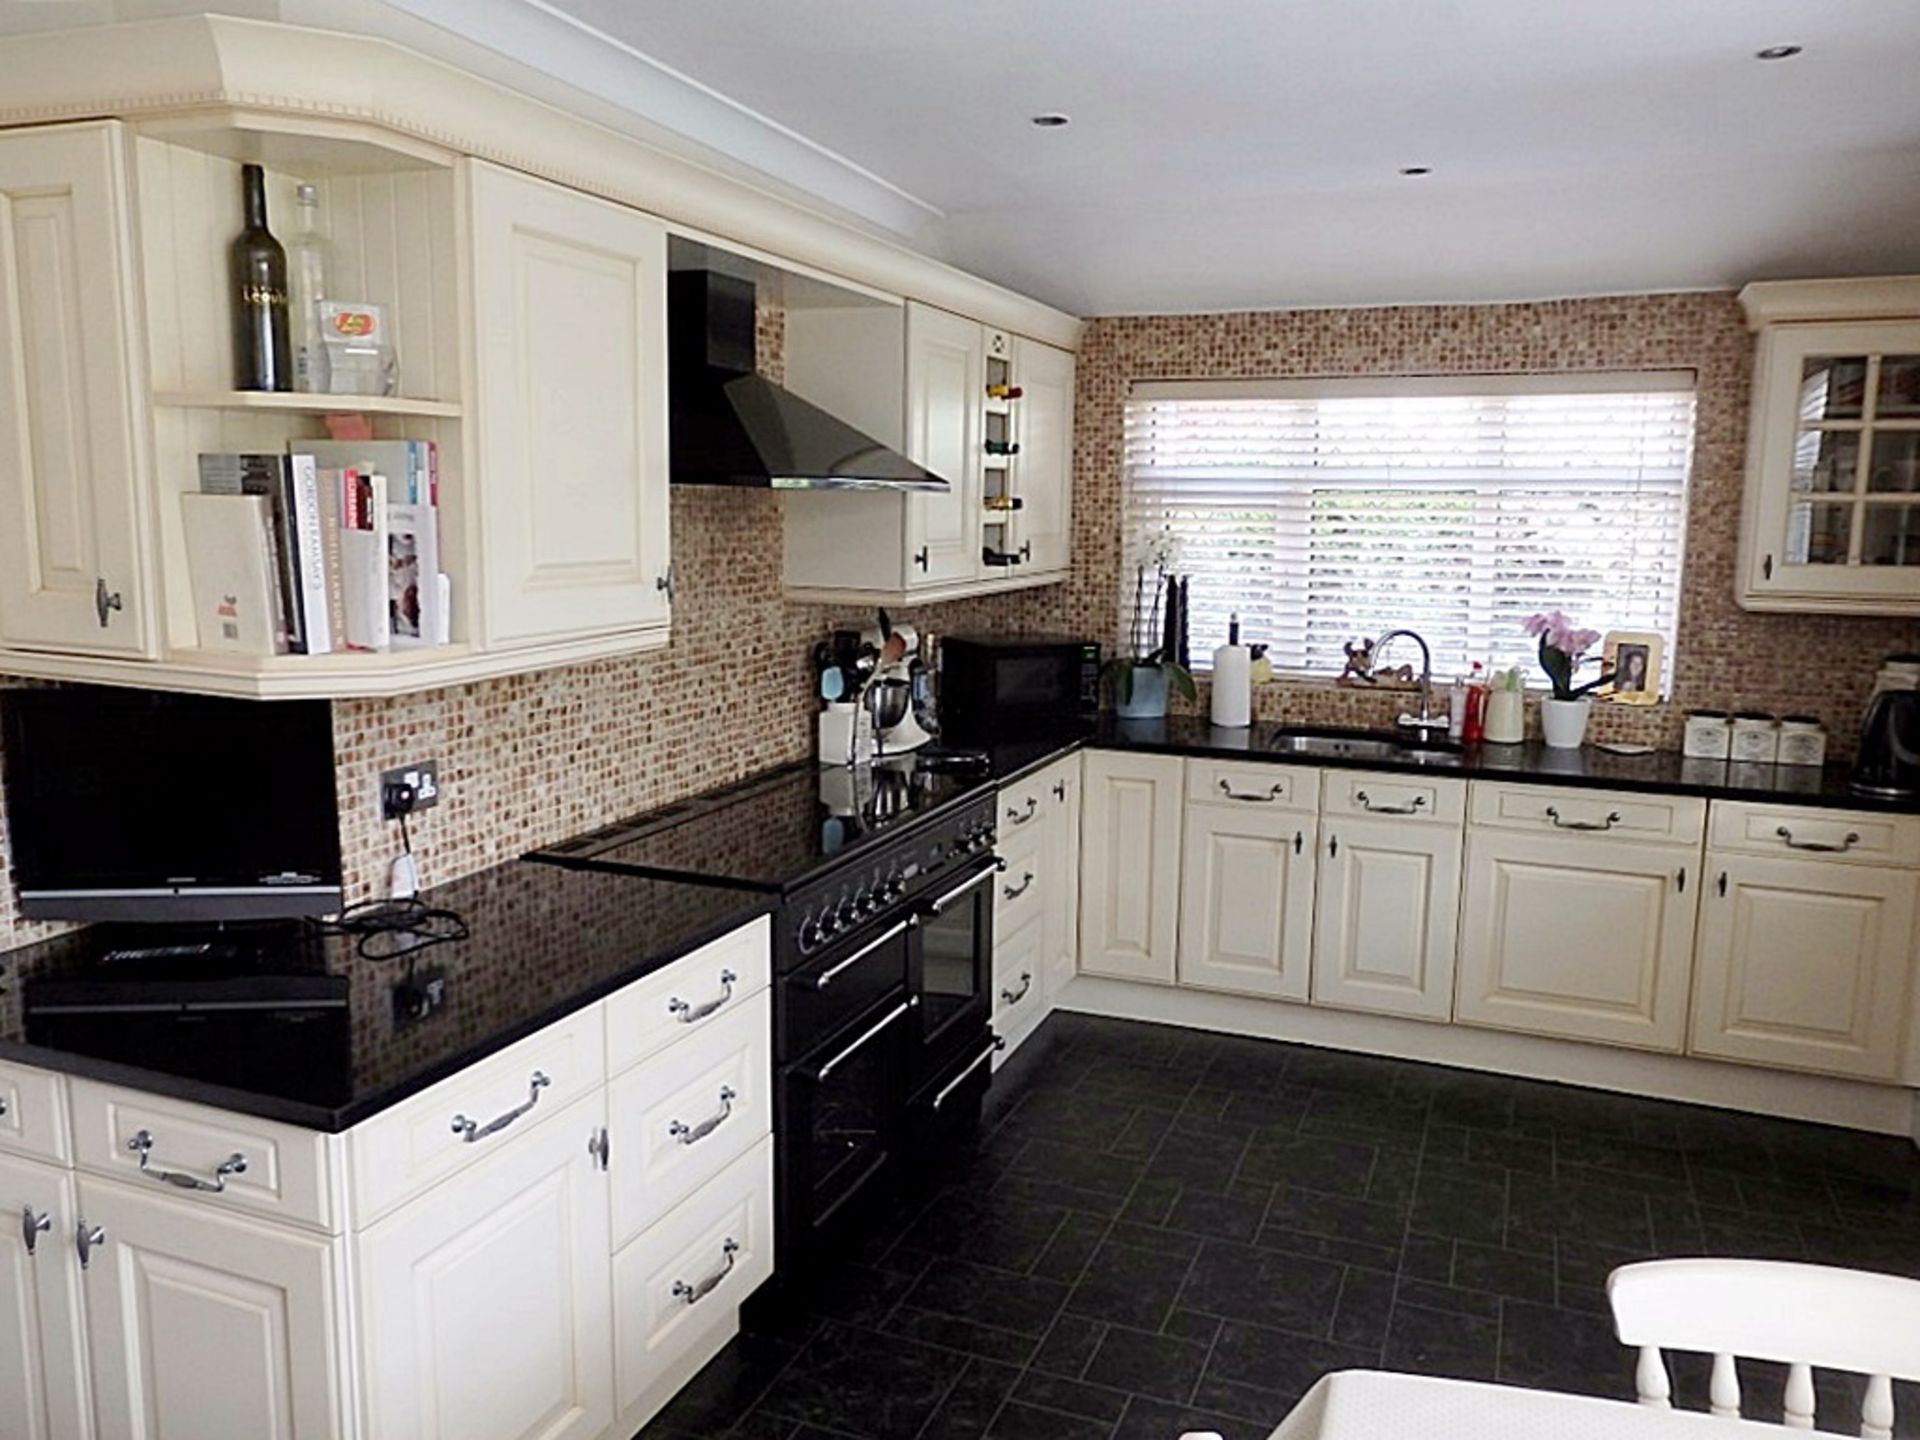 1 x Traditional Style Cream Kitchen With Luxurious Black Granite Worktops - Includes Freezer &